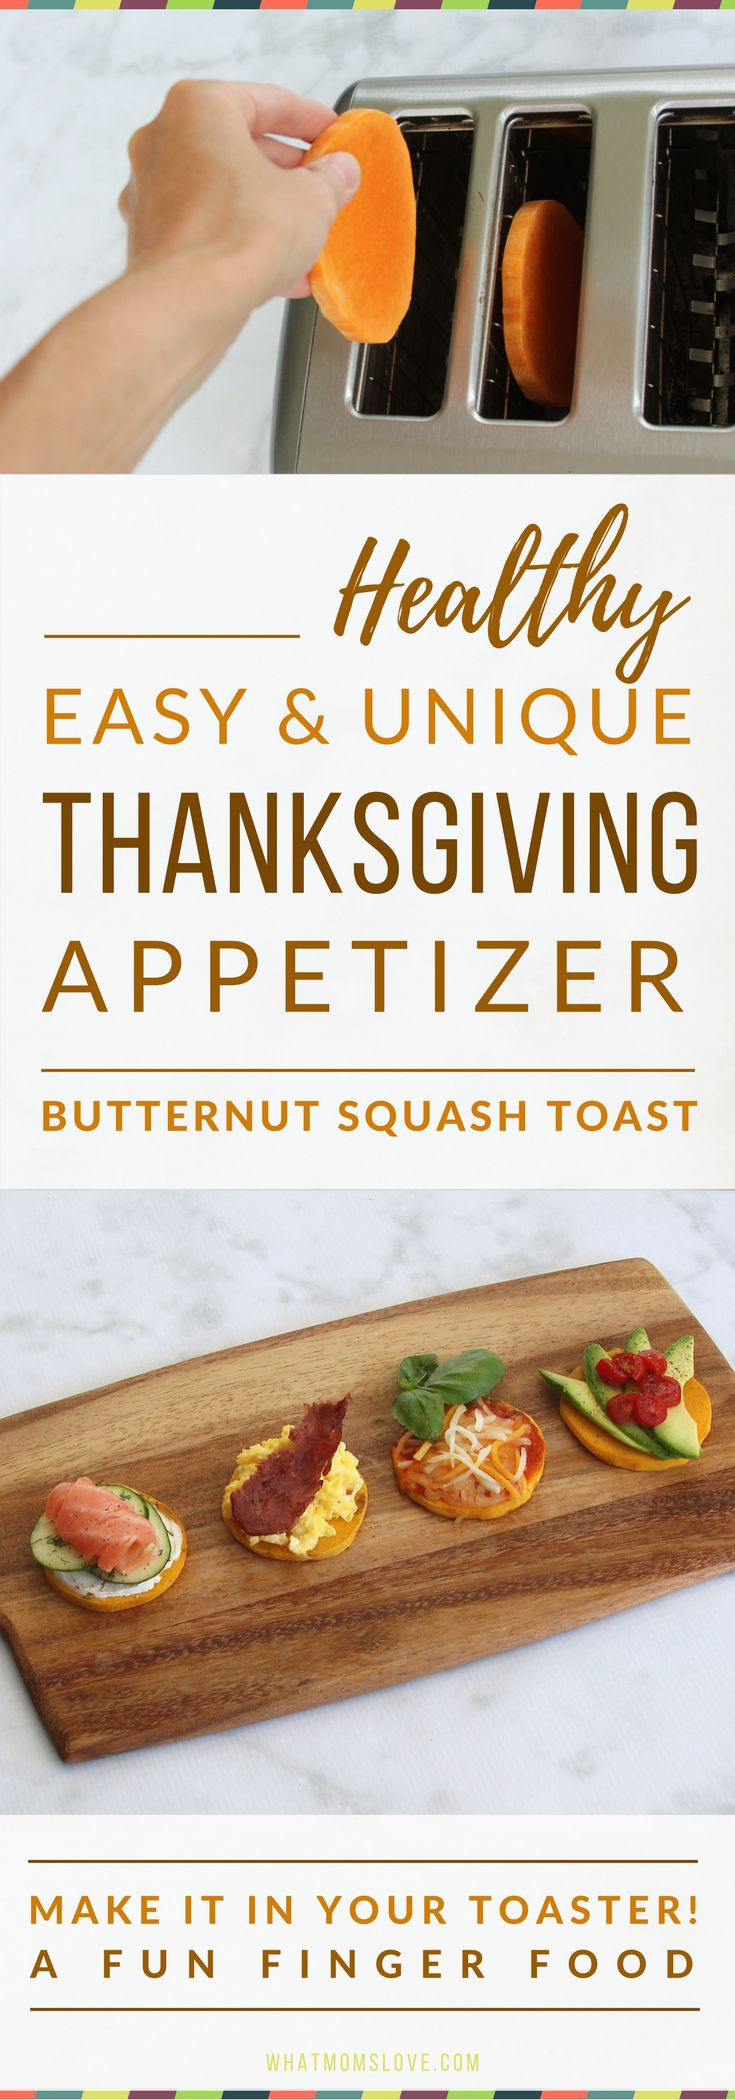 Paleo Thanksgiving Appetizers
 25 Best Ideas about Easy Thanksgiving Appetizers on